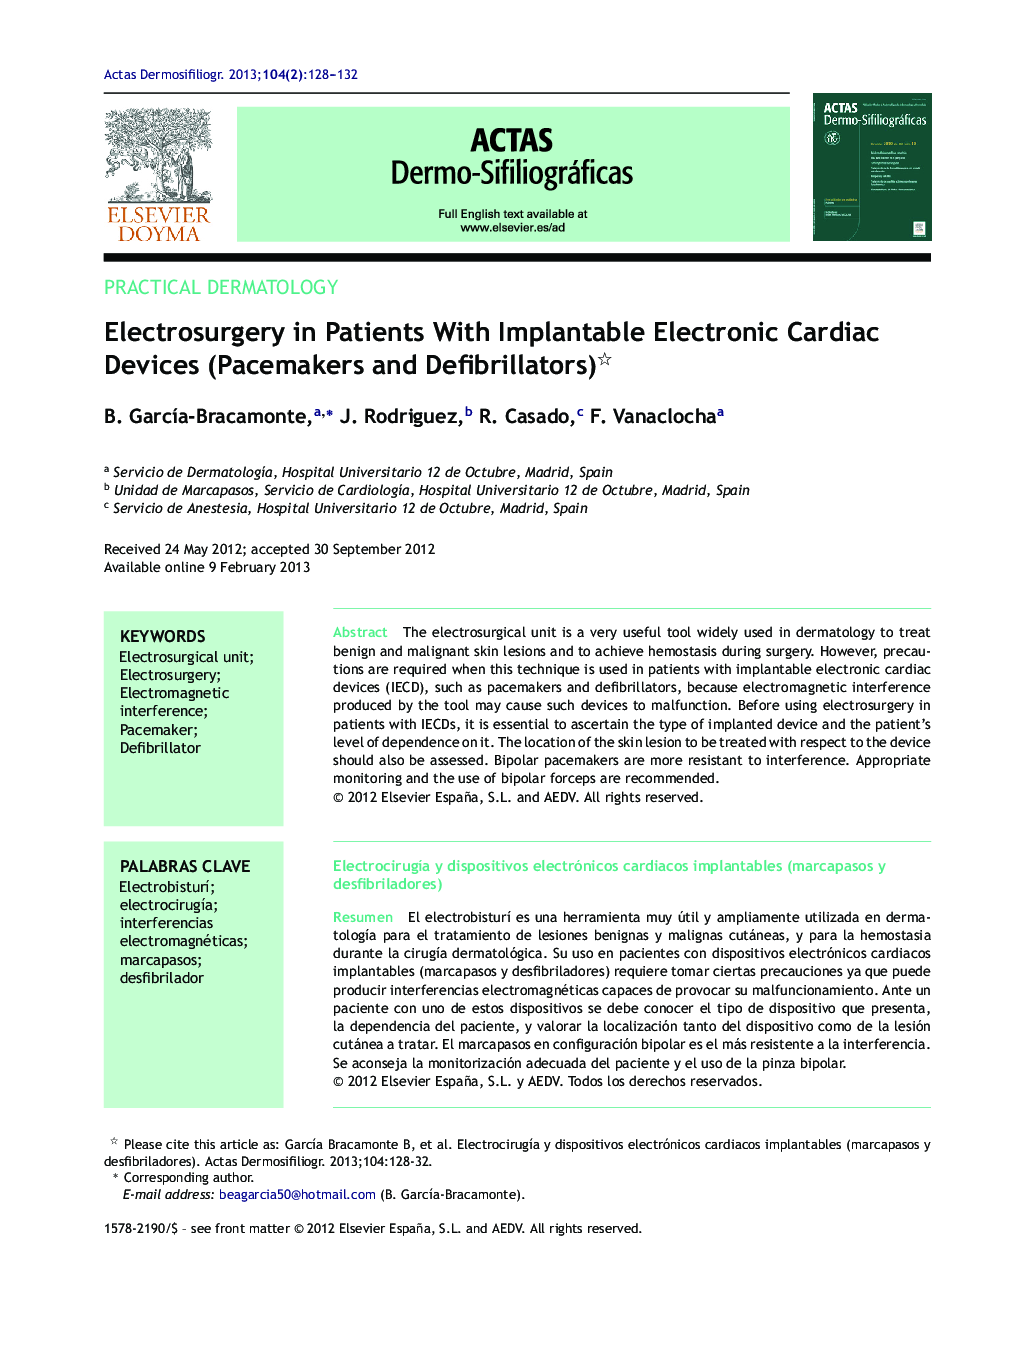 Electrosurgery in Patients With Implantable Electronic Cardiac Devices (Pacemakers and Defibrillators) 